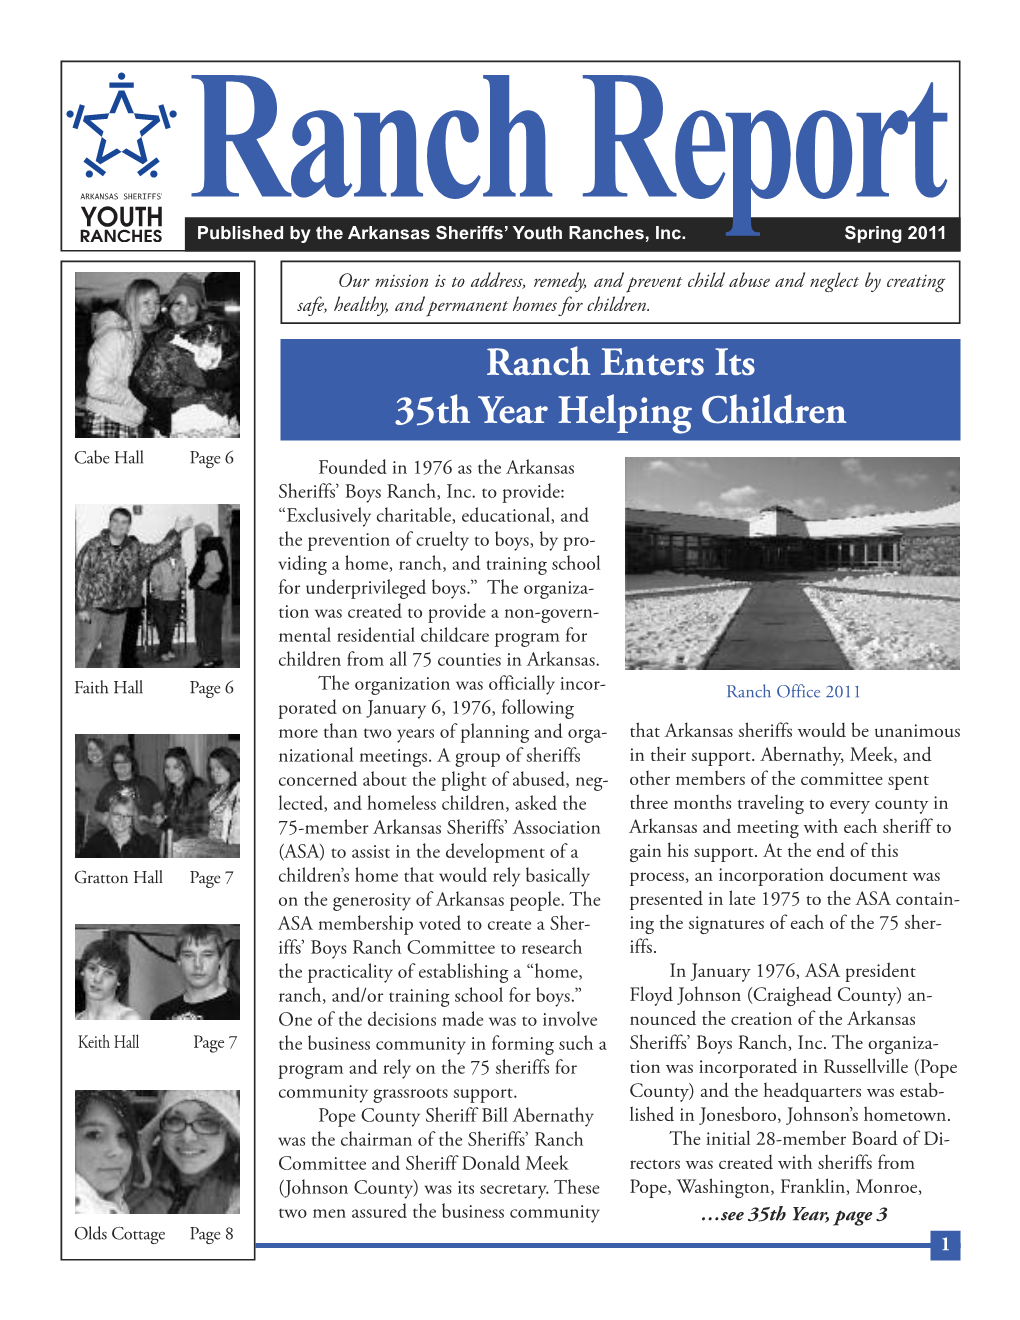 Ranch Enters Its 35Th Year Helping Children